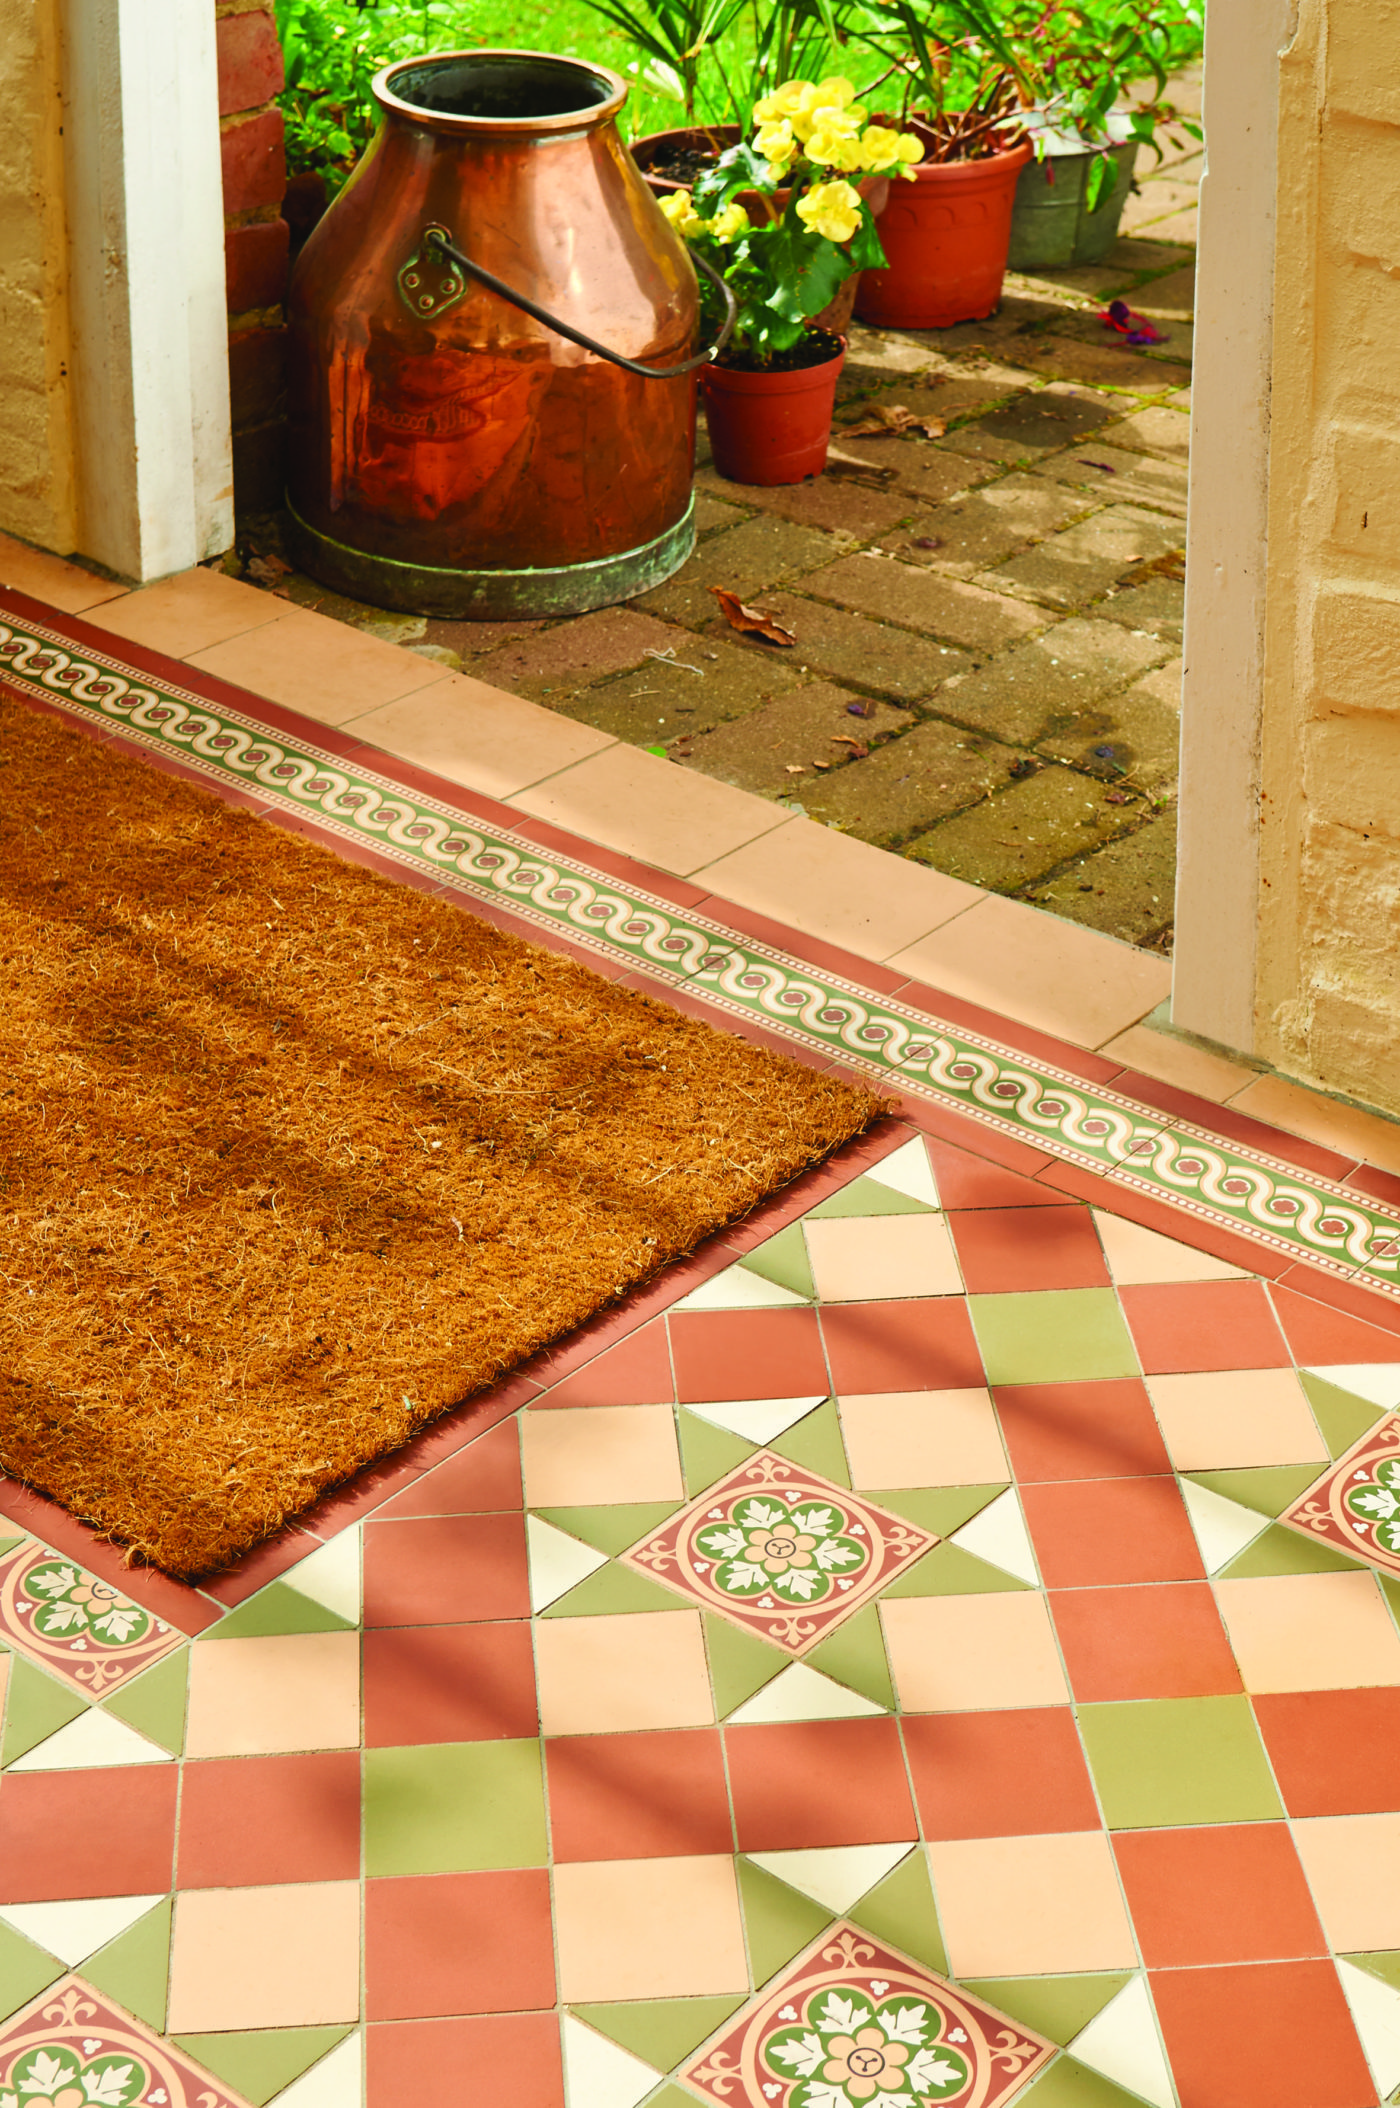 Blenheim pattern in Green, Red, Buff and White with Telford border